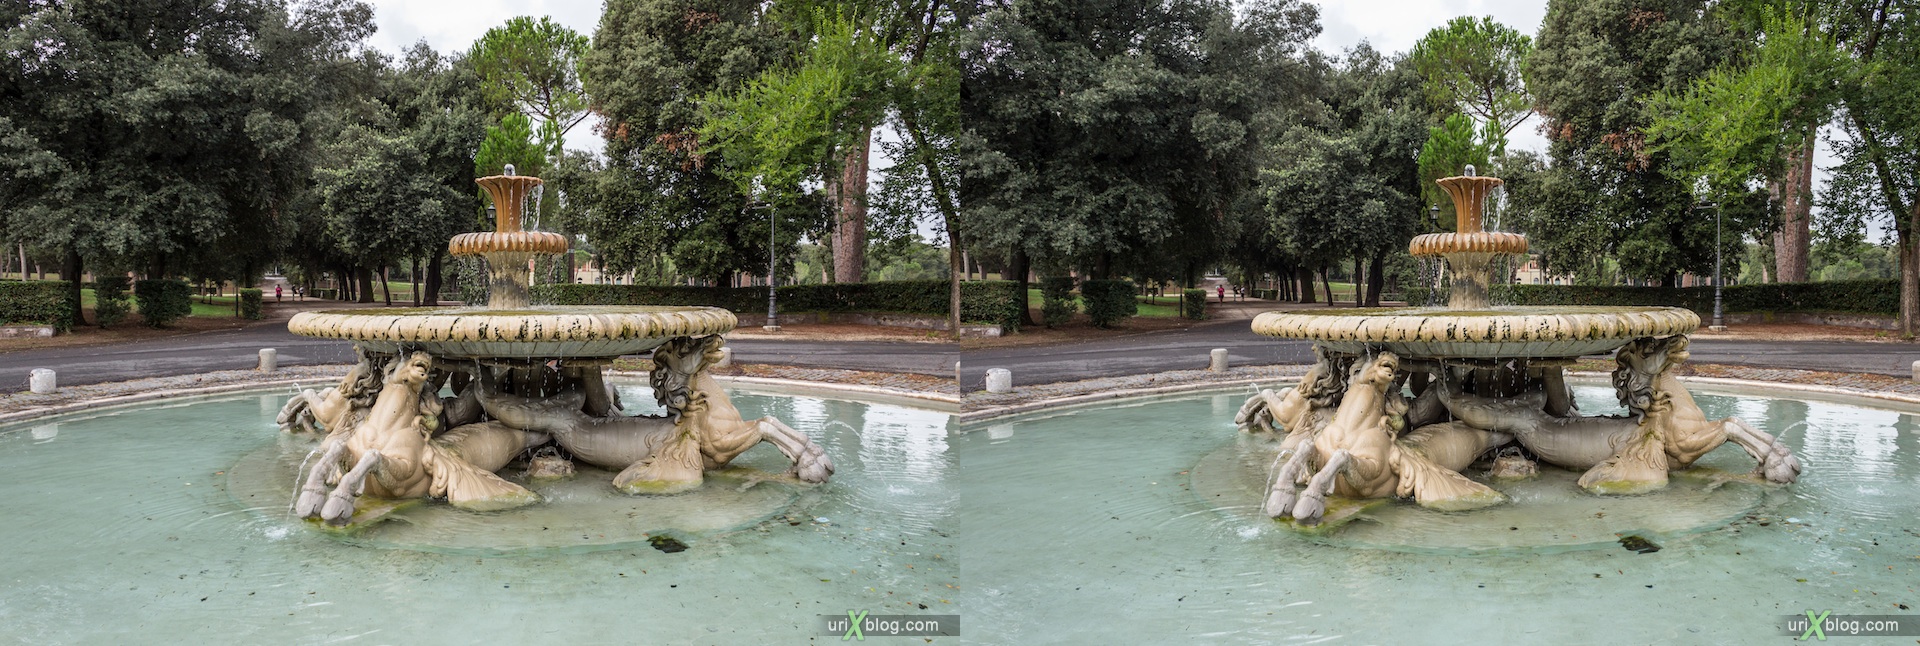 2012, fountain, park villa Borghese, Rome, Italy, 3D, stereo pair, cross-eyed, crossview, cross view stereo pair